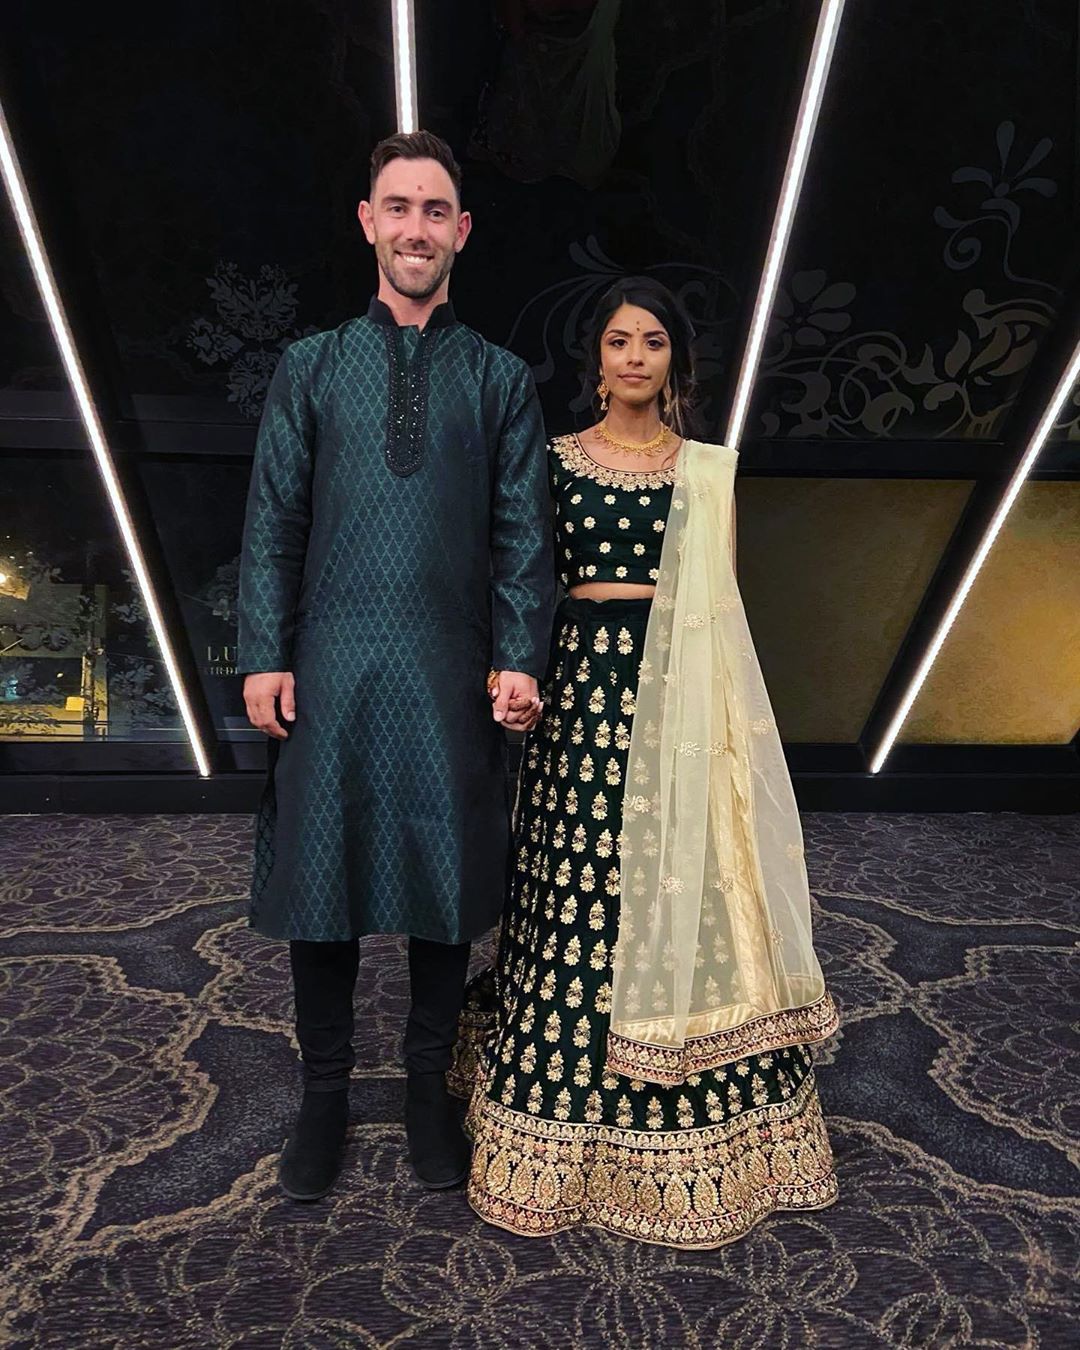 Foreign players, who married Indian women